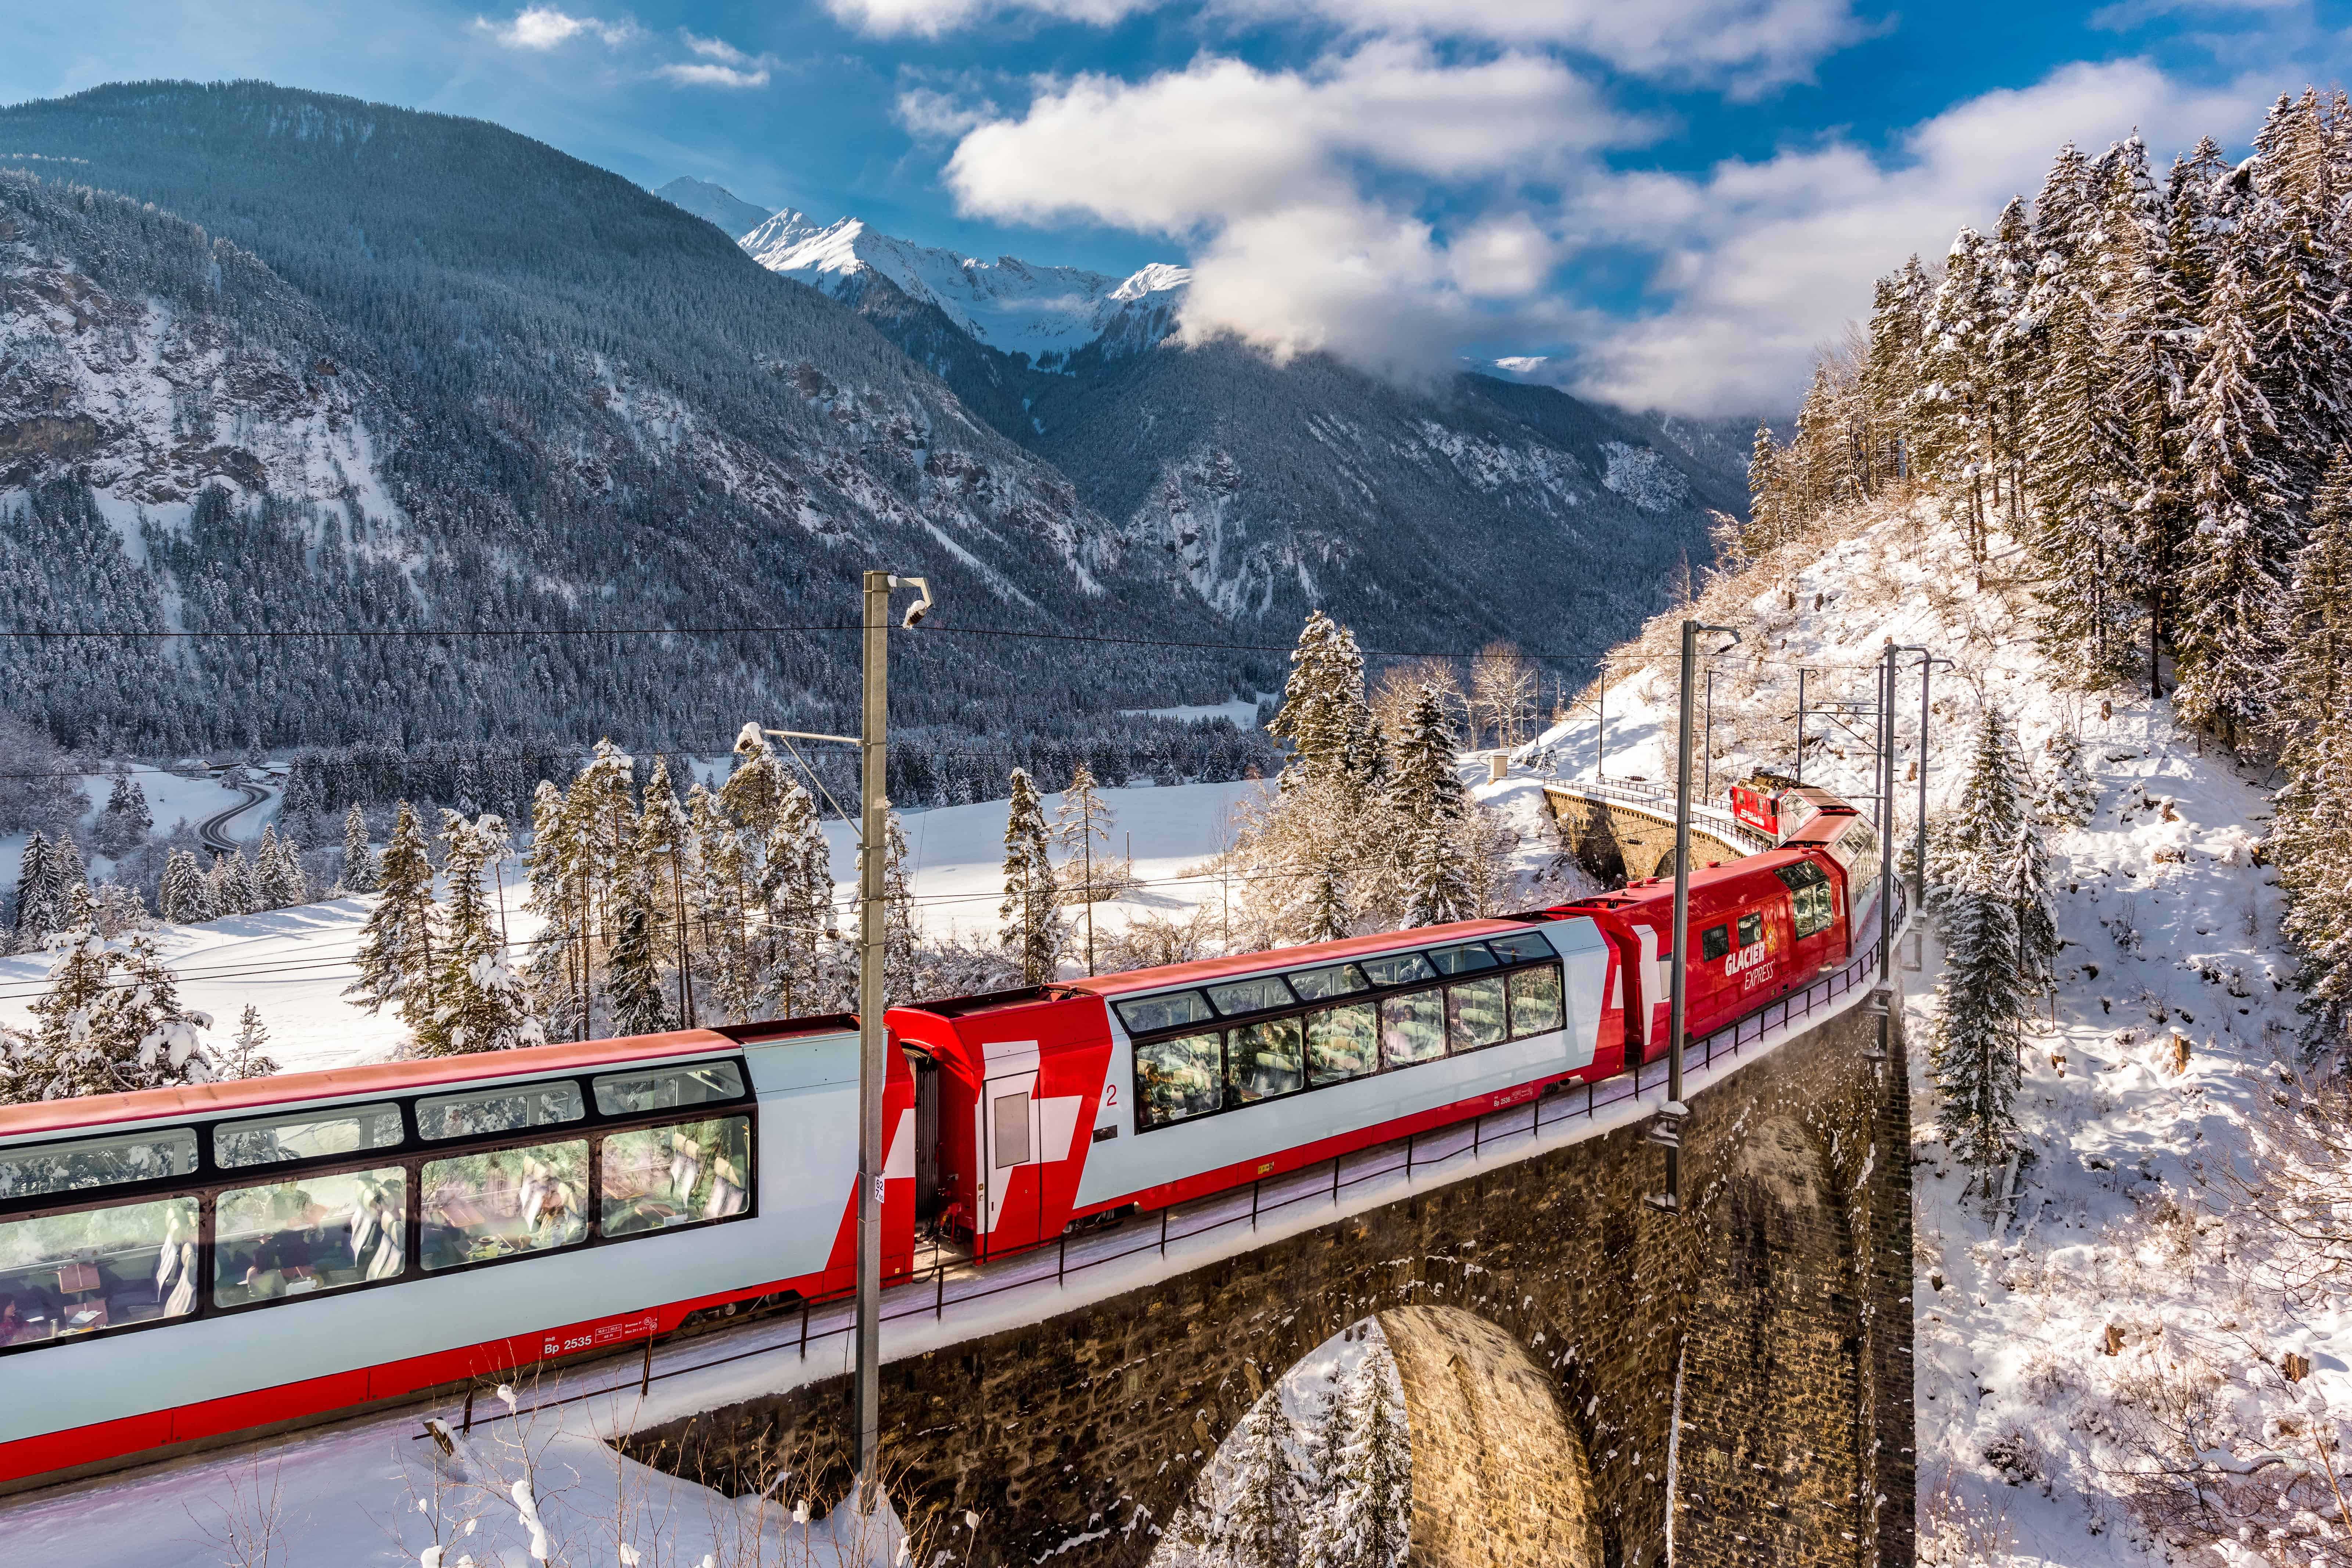 Whispers of the Rails: A Romantic Journey Through Europe by Train